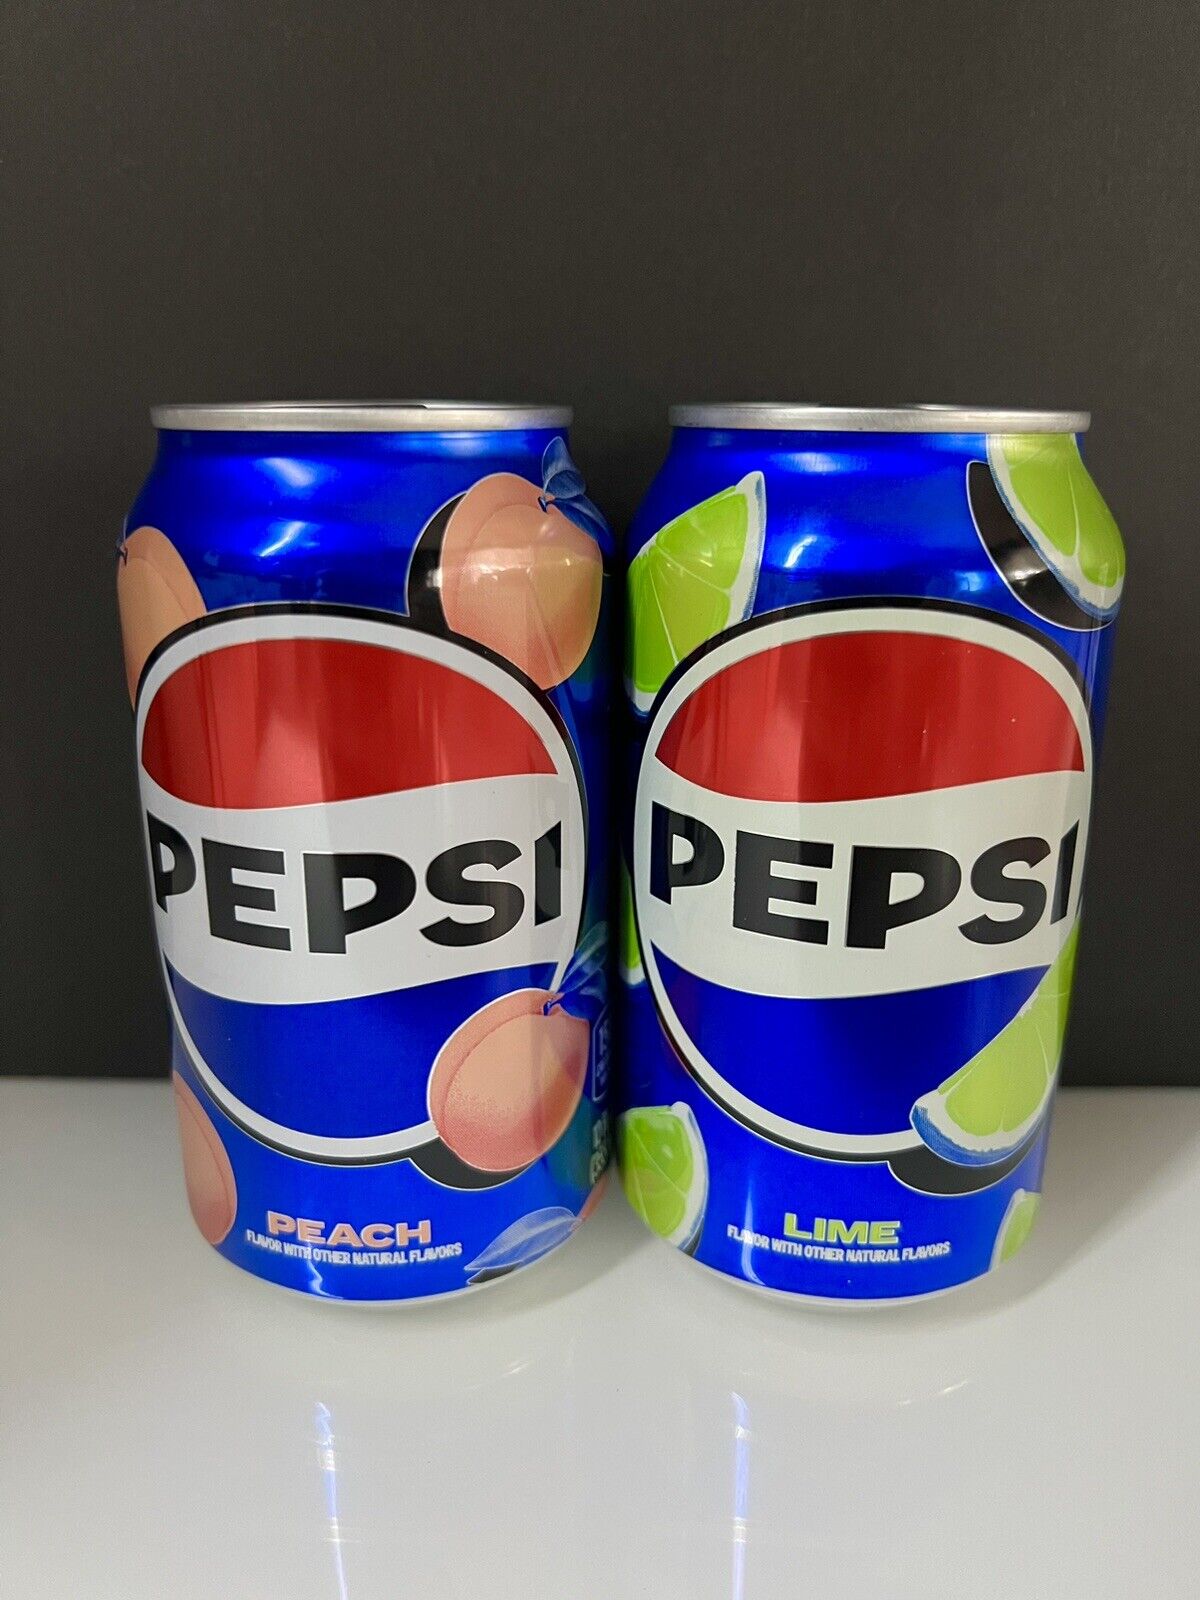 🔵 Brand New Limited Edition Rare Pepsi PEACH & LIME Flavored Soda (2 Cans)